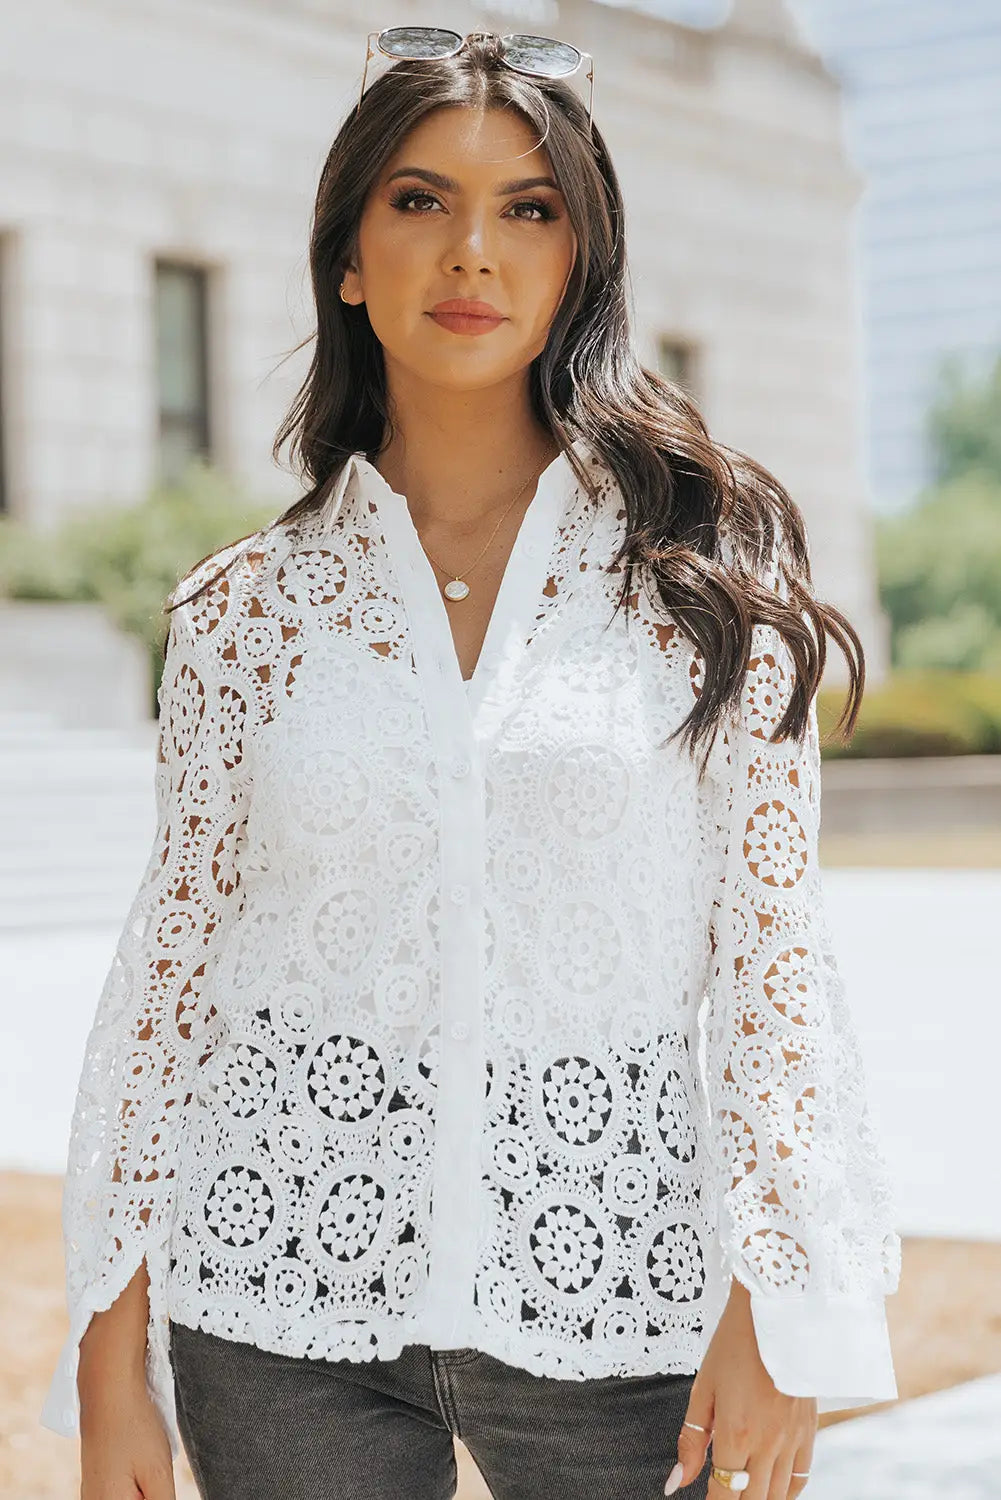 White crochet lace hollow-out turn-down collar shirt - s / 95% polyester + 5% elastane - tops